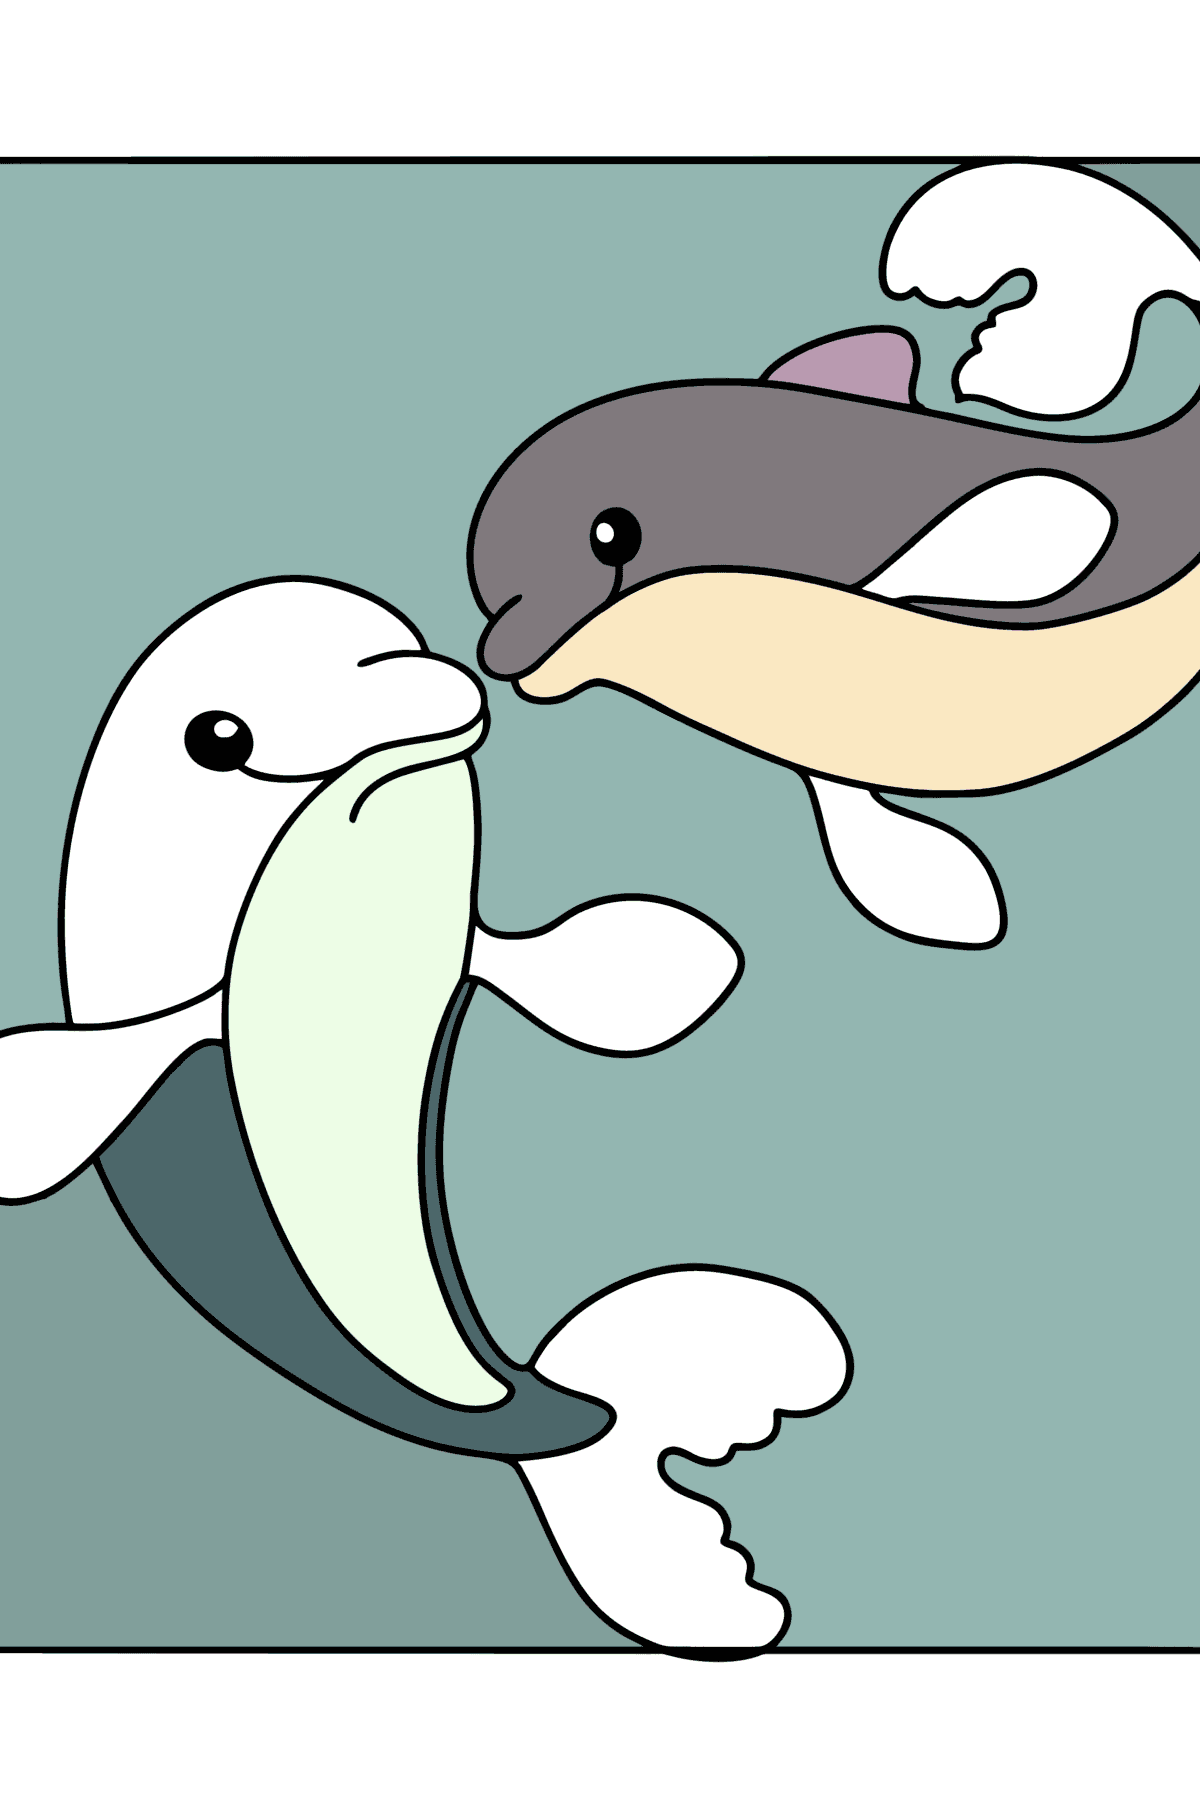 Cute Dolphins coloring page - Coloring Pages for Kids